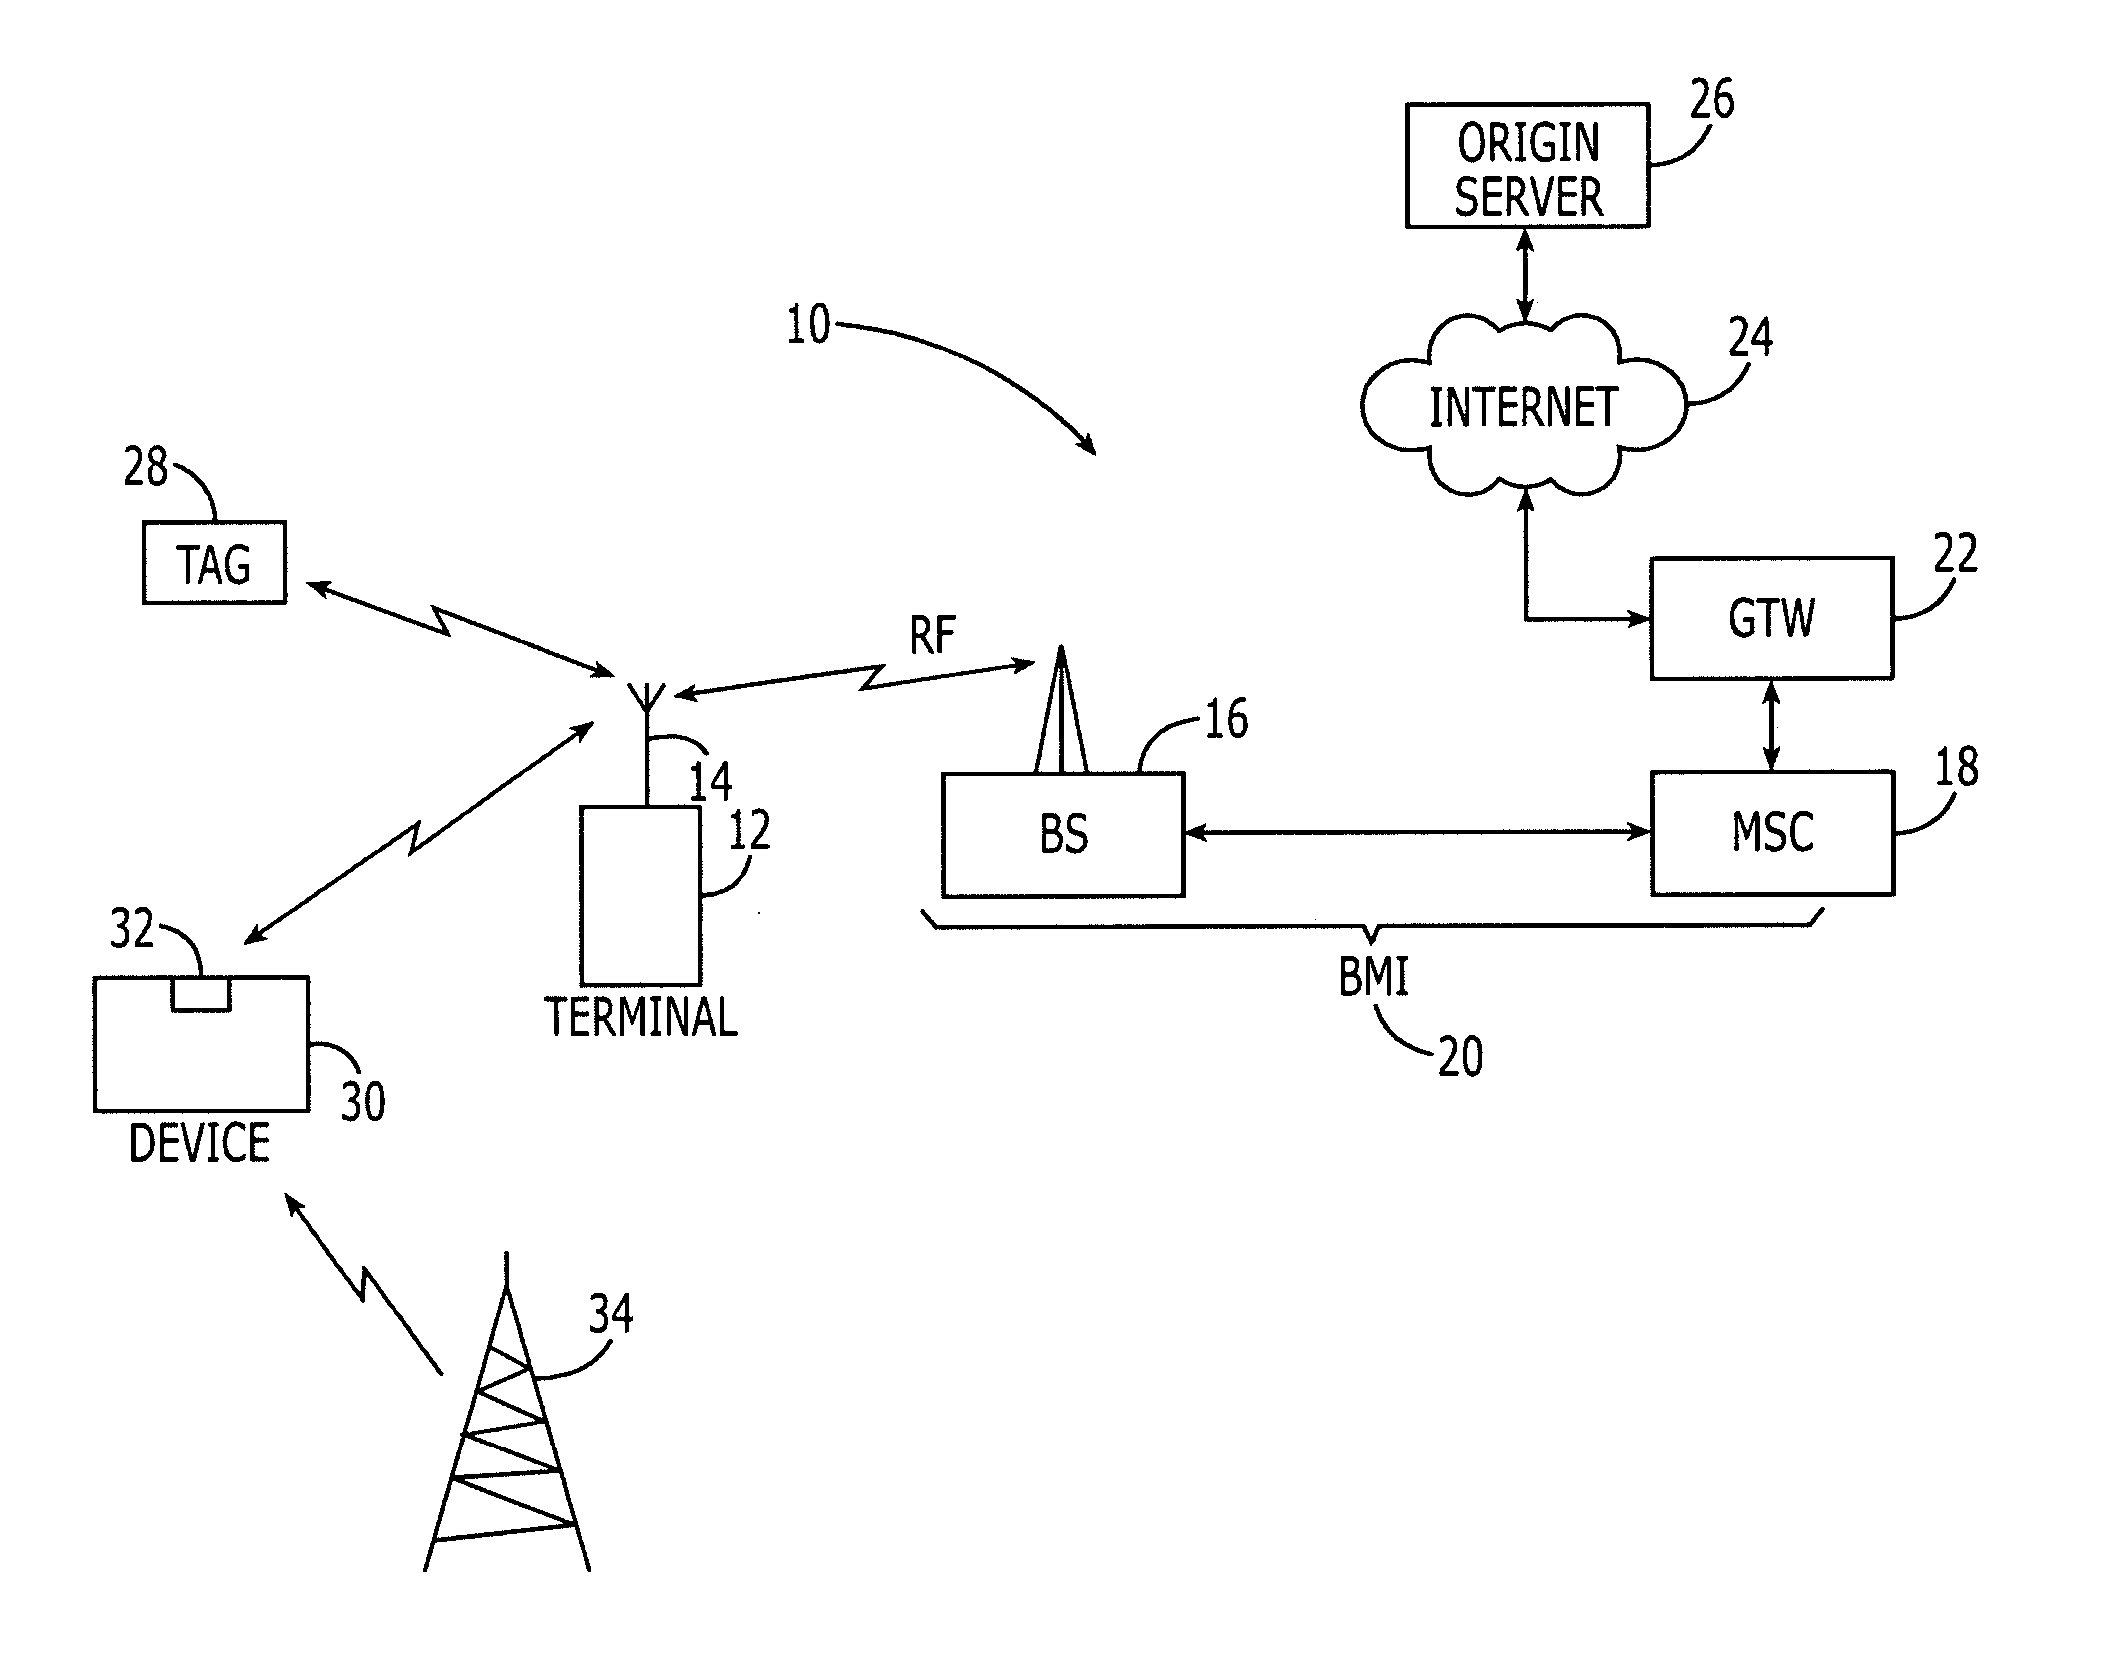 Methods, systems, devices and computer program products for providing user-access to broadcast content in combination with short-range communication content